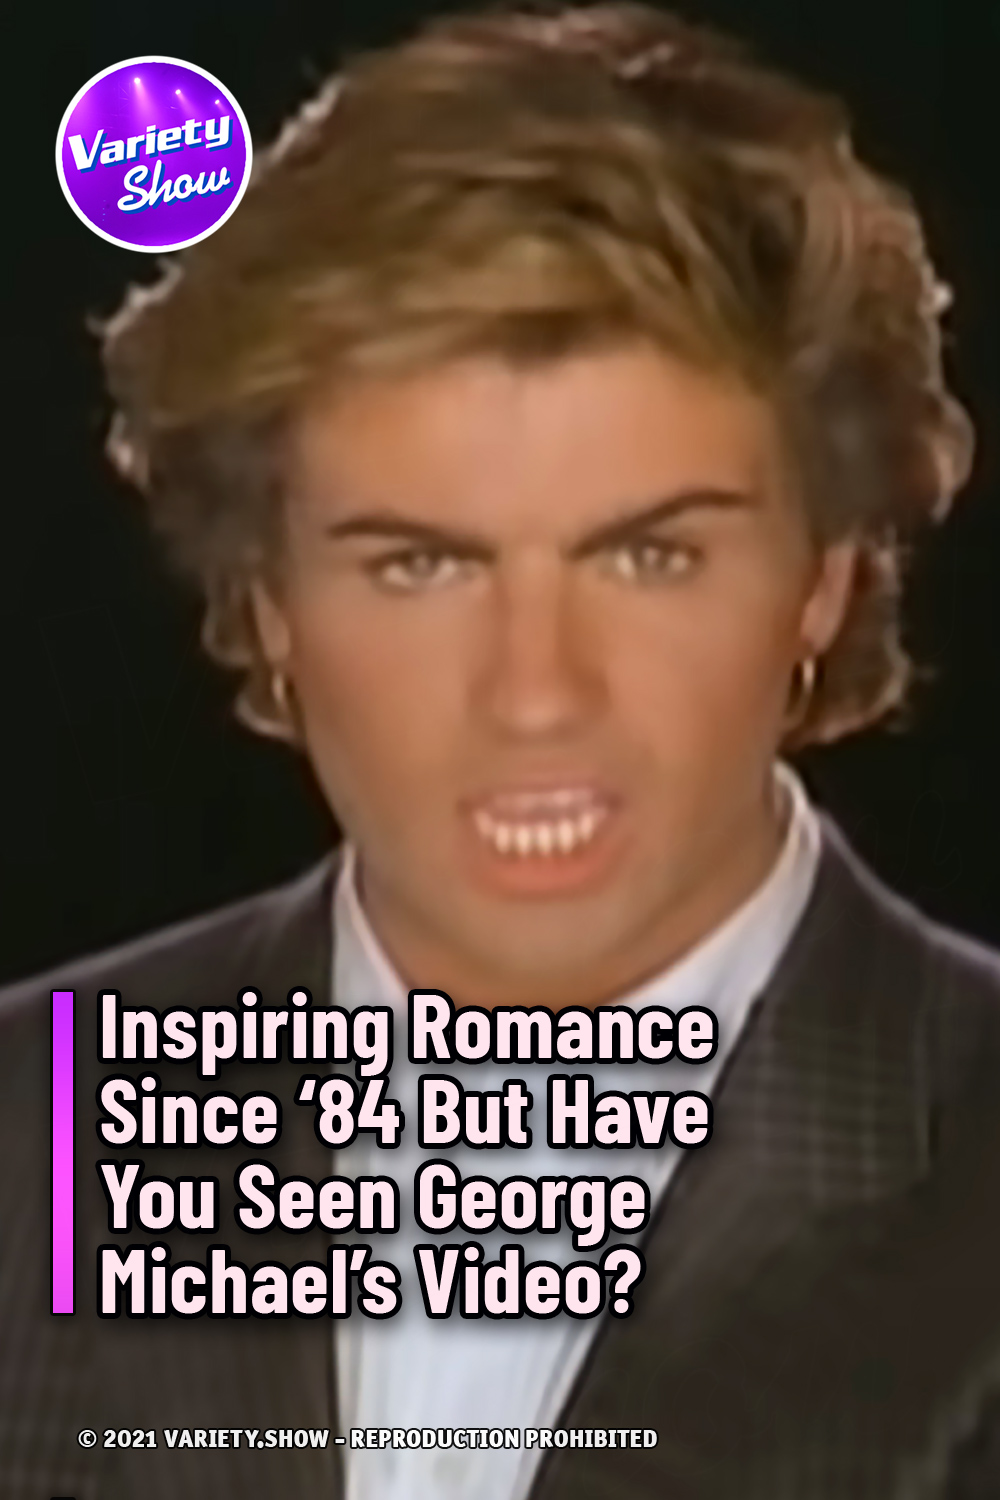 Inspiring Romance Since ‘84 But Have You Seen George Michael’s Video?